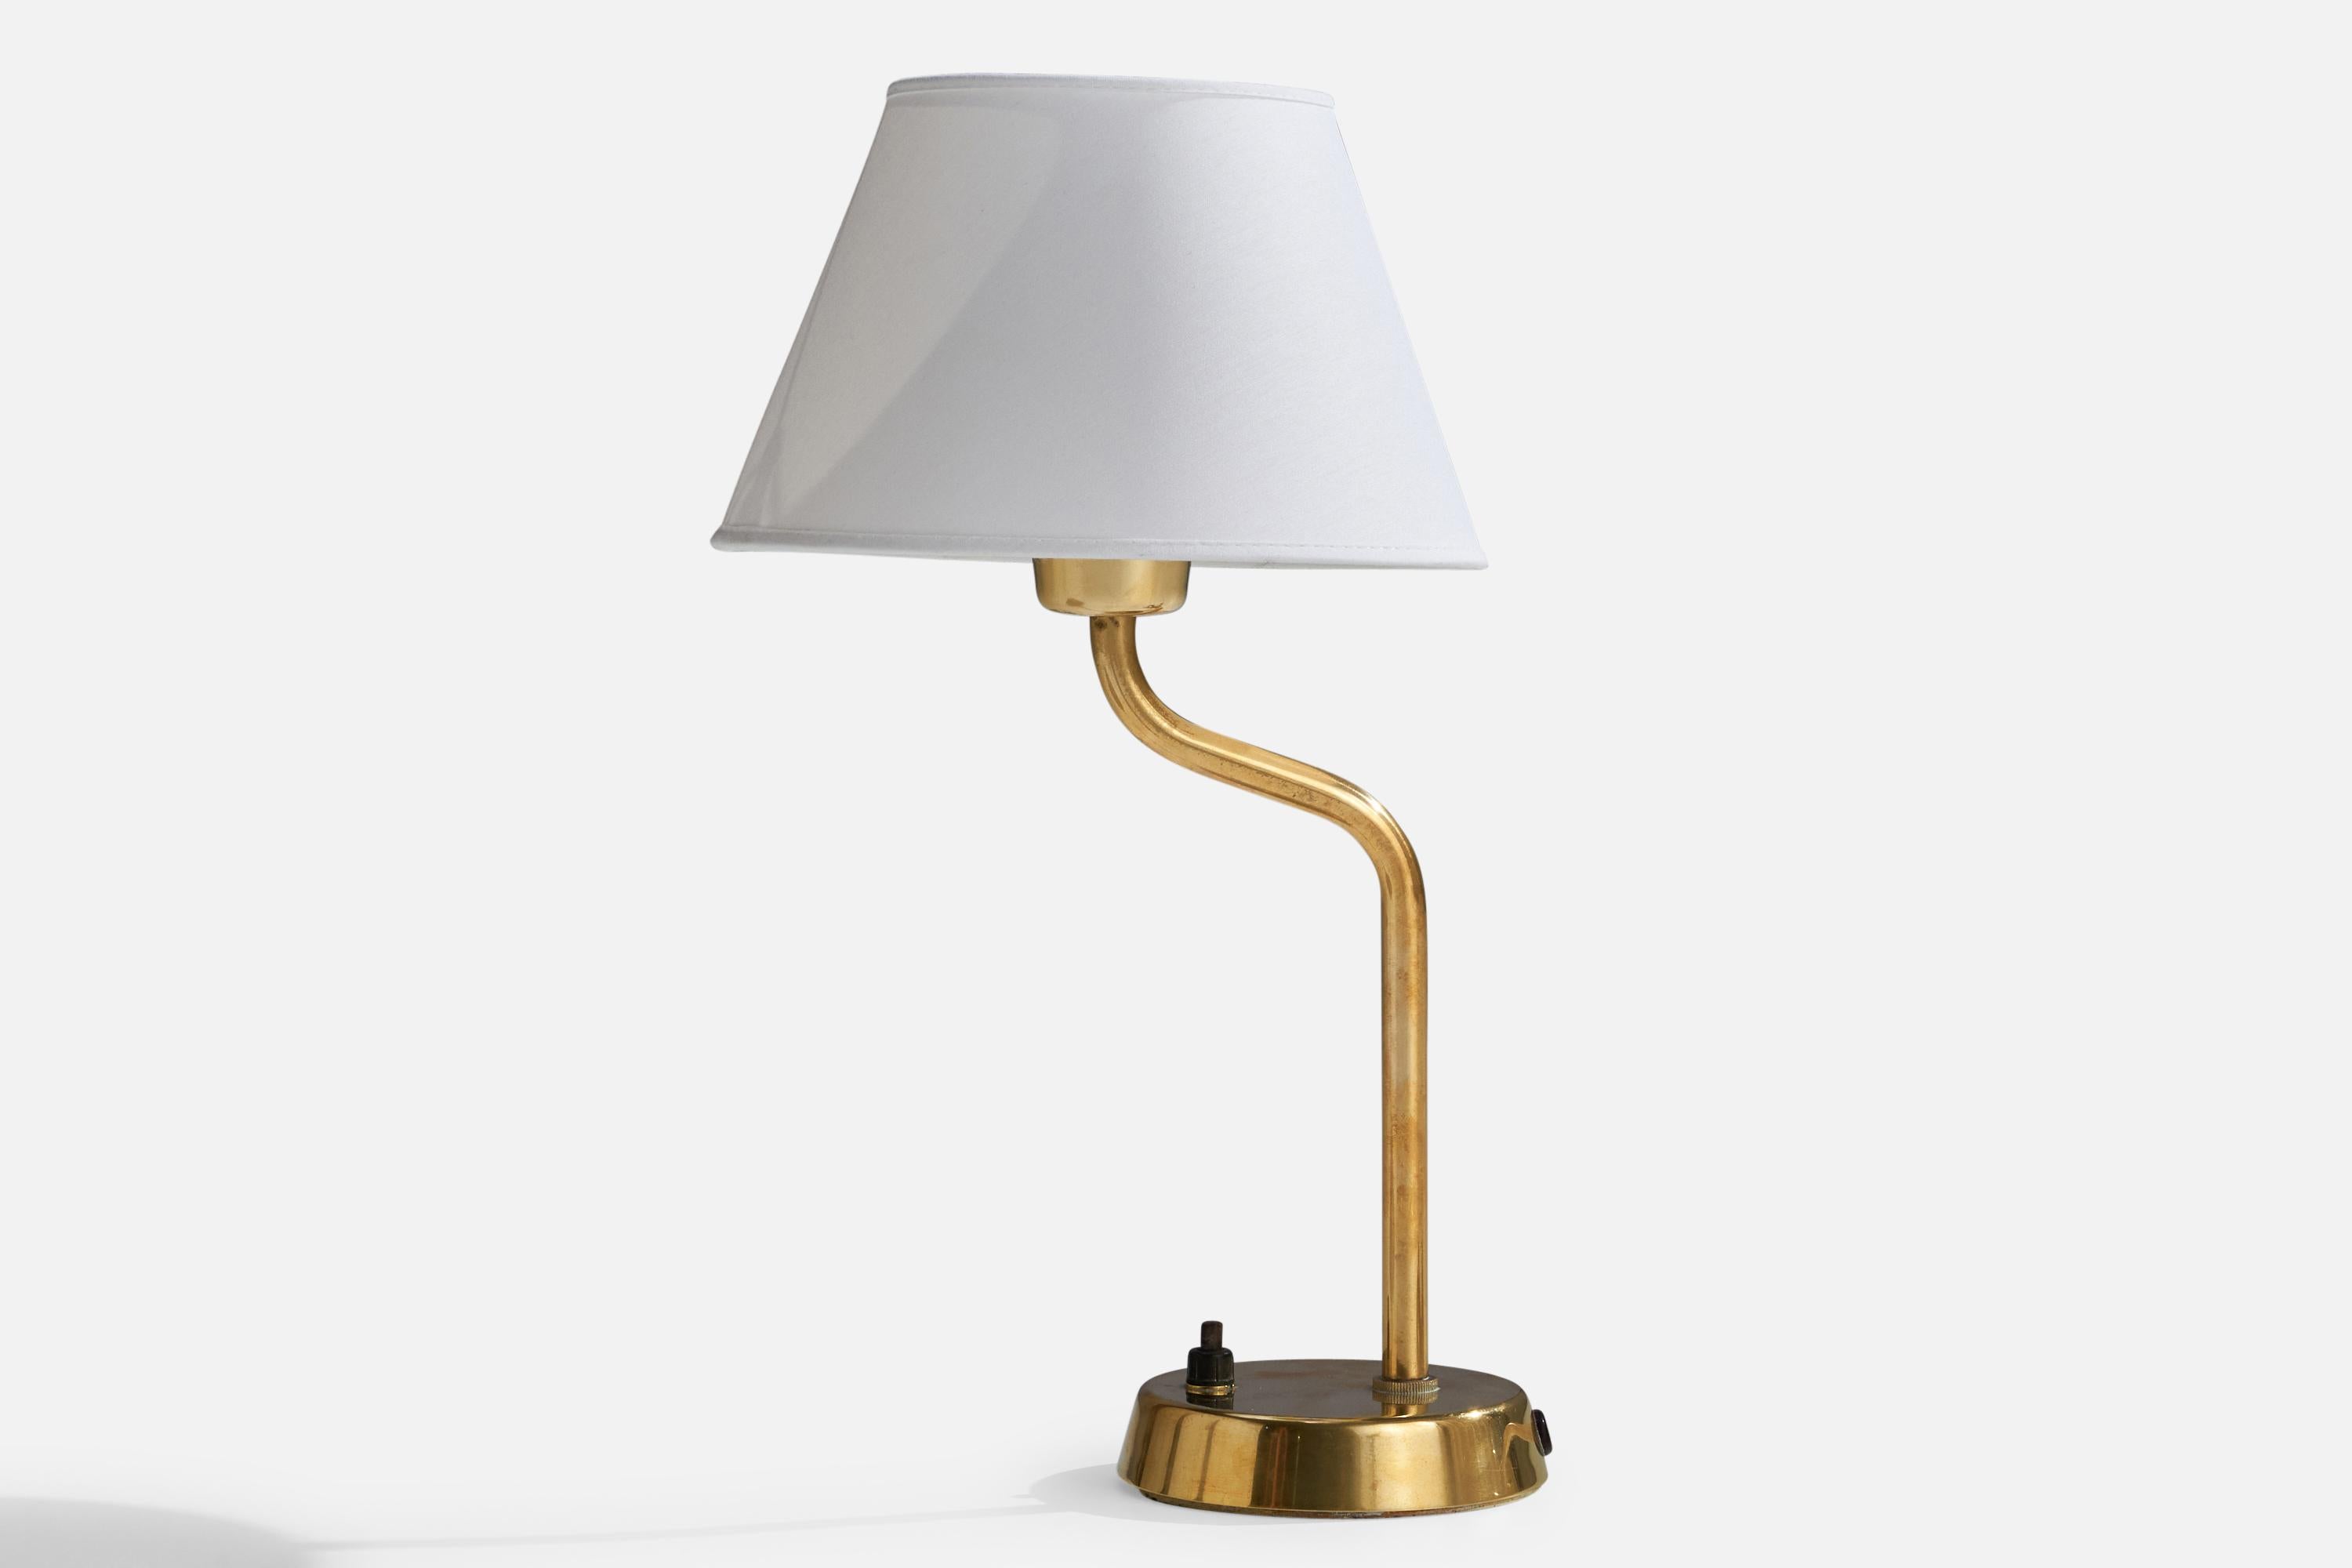 A brass and white fabric table lamp designed and produced by ASEA, Sweden, 1940s.

Dimensions of Lamp (inches): 12” H x 4.75” Diameter
Dimensions of Shade (inches): 4.75” Top Diameter x 8.25”Bottom Diameter x 5.25” H
Dimensions of Lamp with Shade